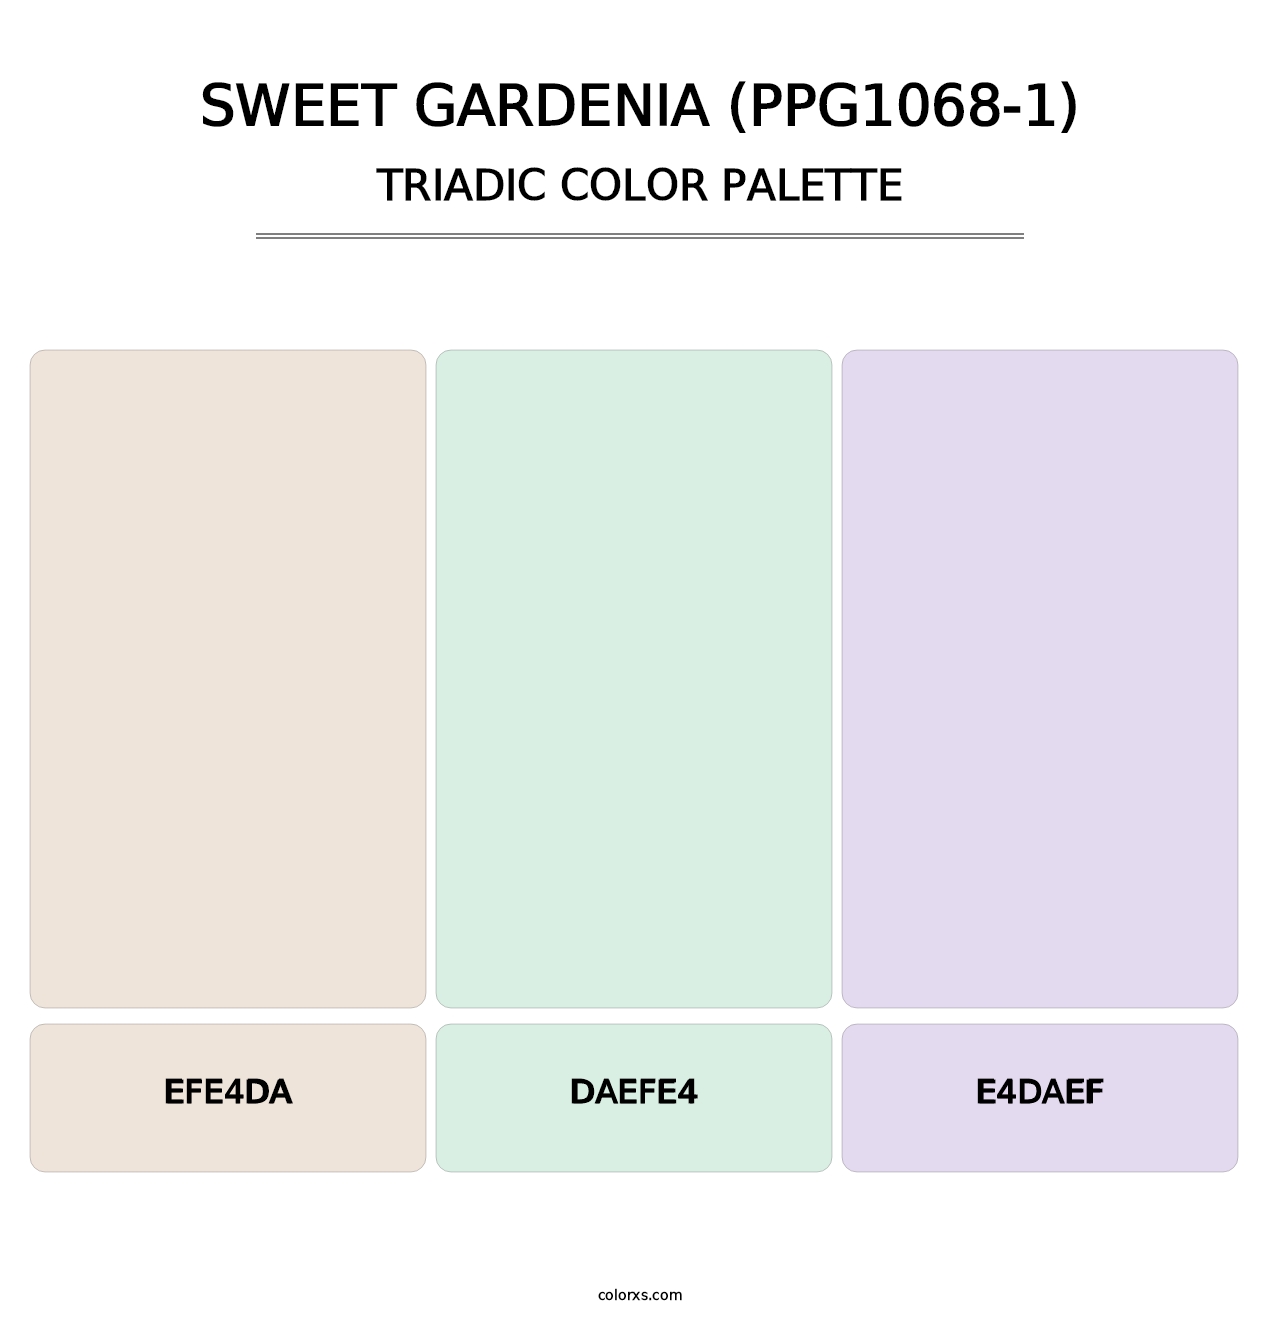 Sweet Gardenia (PPG1068-1) - Triadic Color Palette